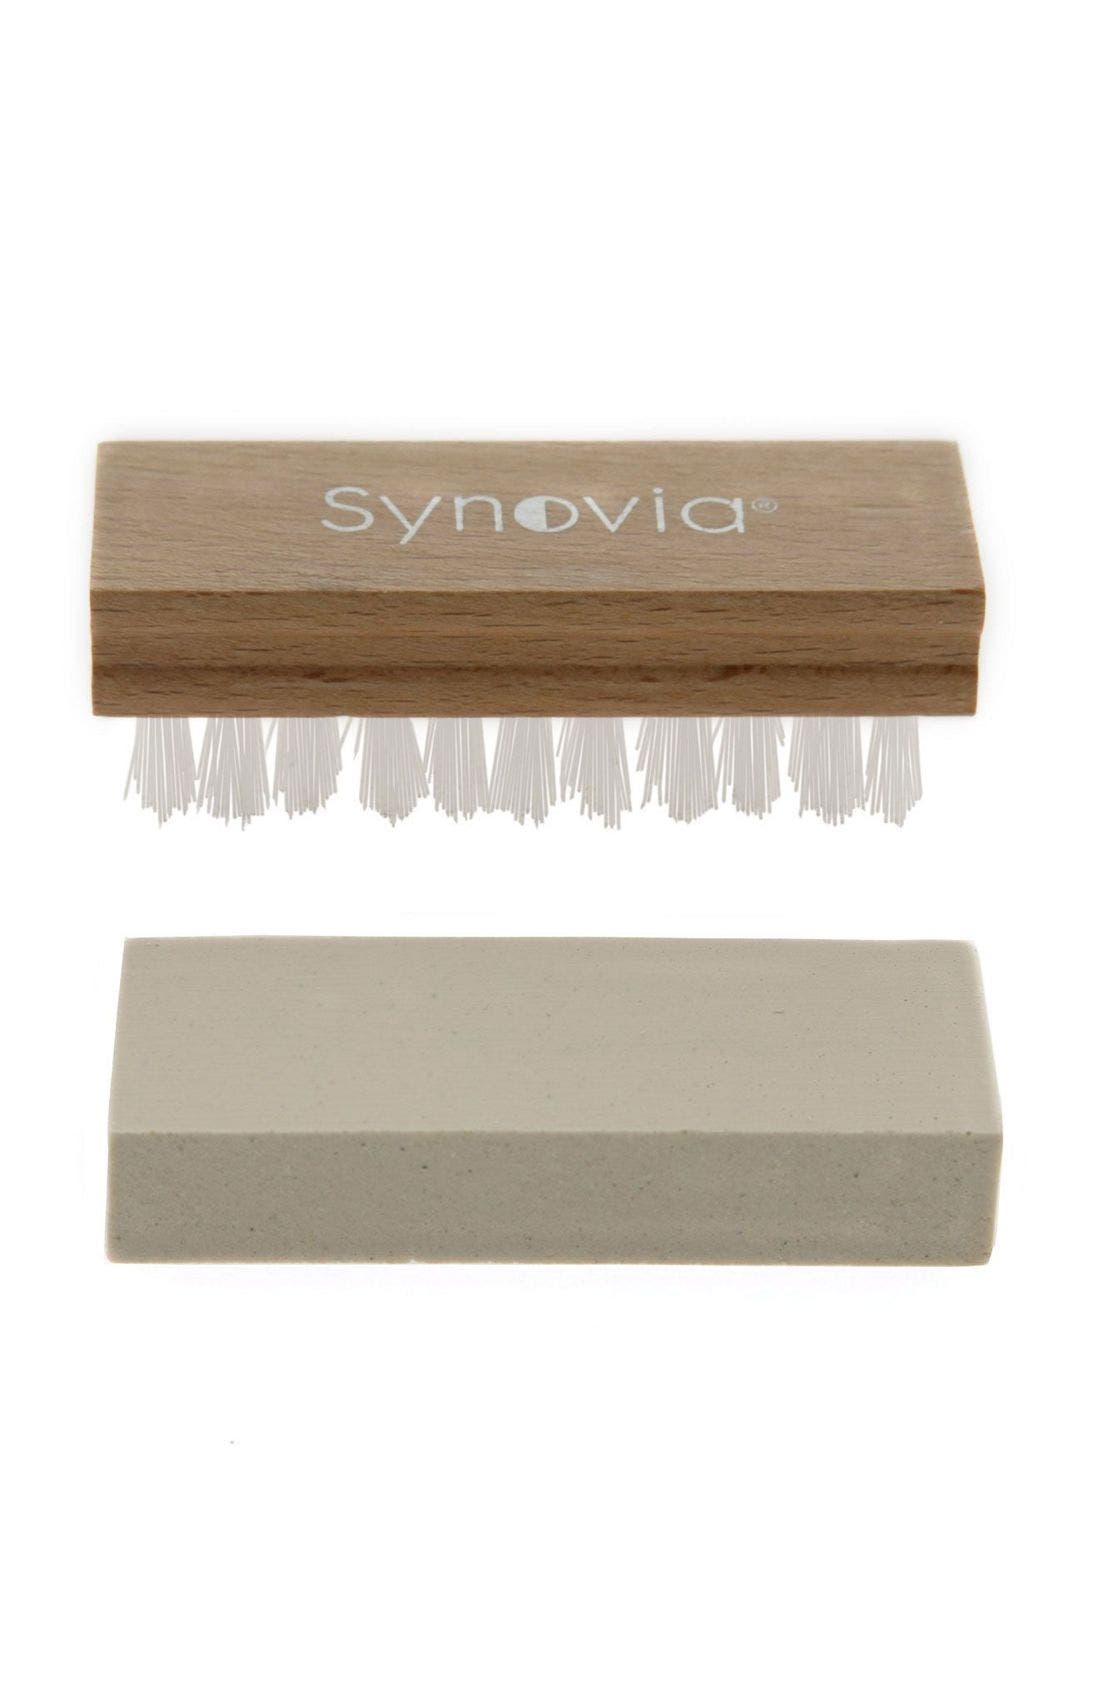 synovia suede and nubuck cleaner